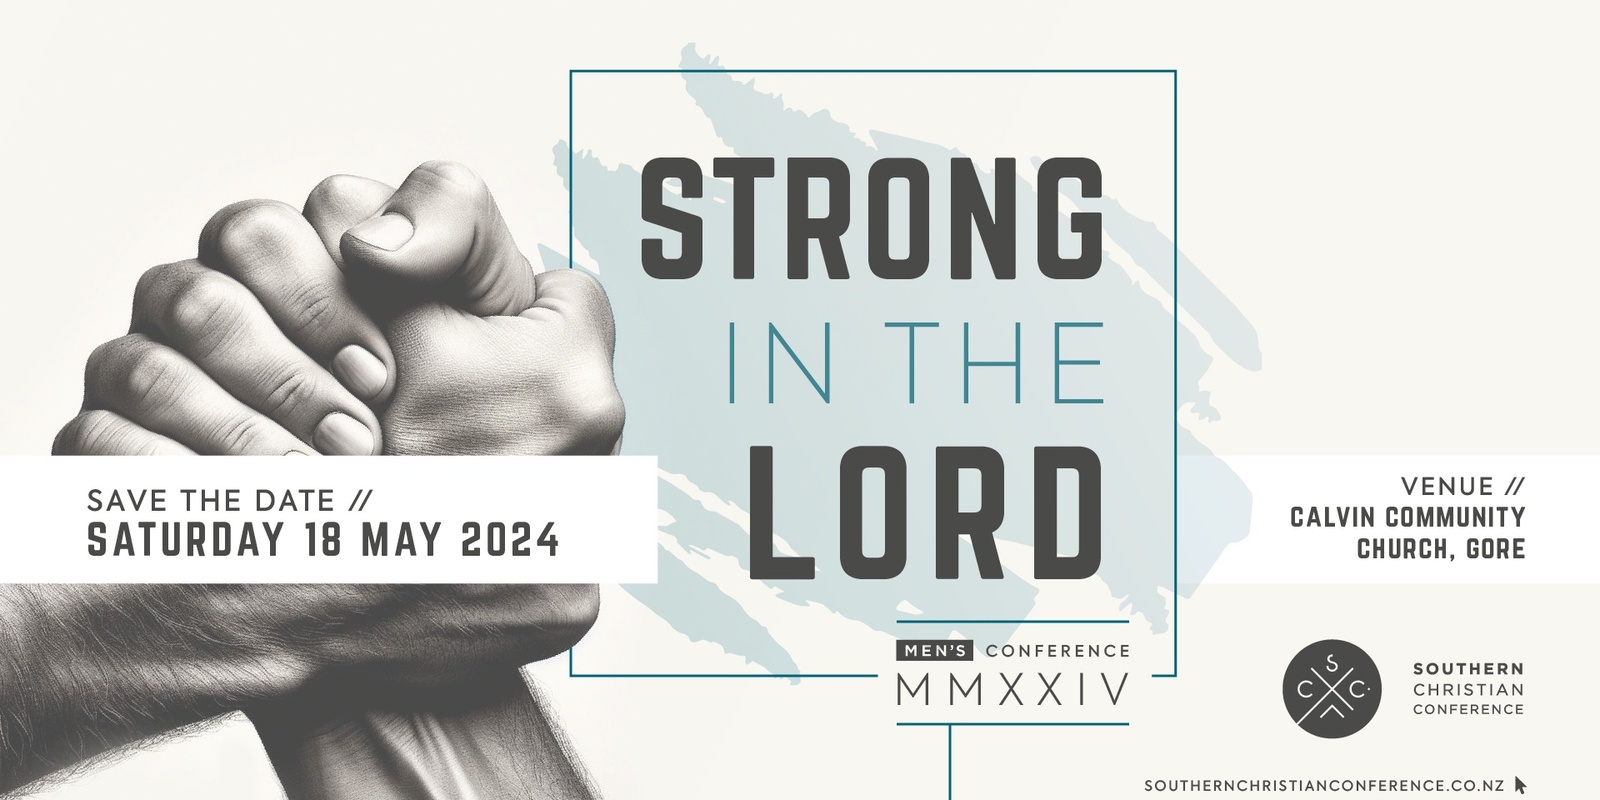 Banner image for "Strong in the Lord" Men's Conference 2024